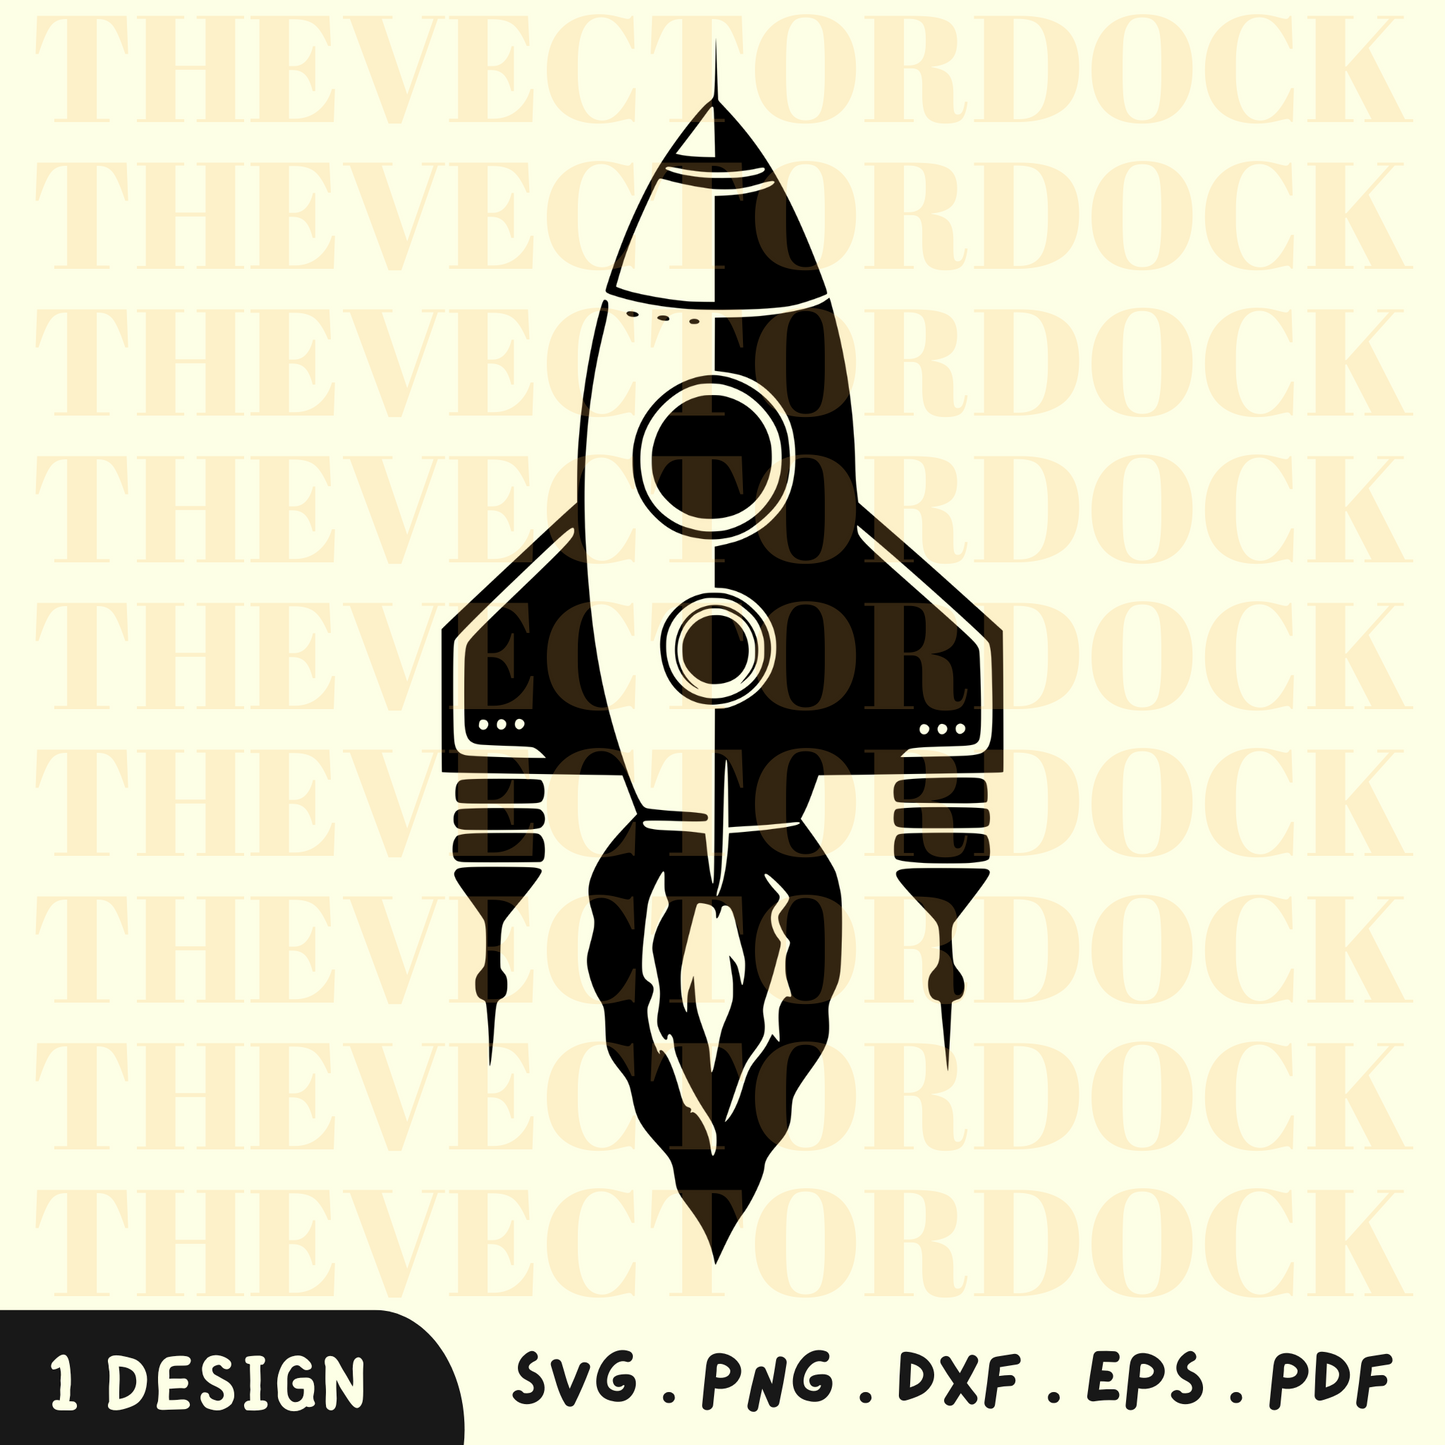 Starship SVG Design, Starship SVG, Starship, Starship PNG, Space Project, Starship Vector